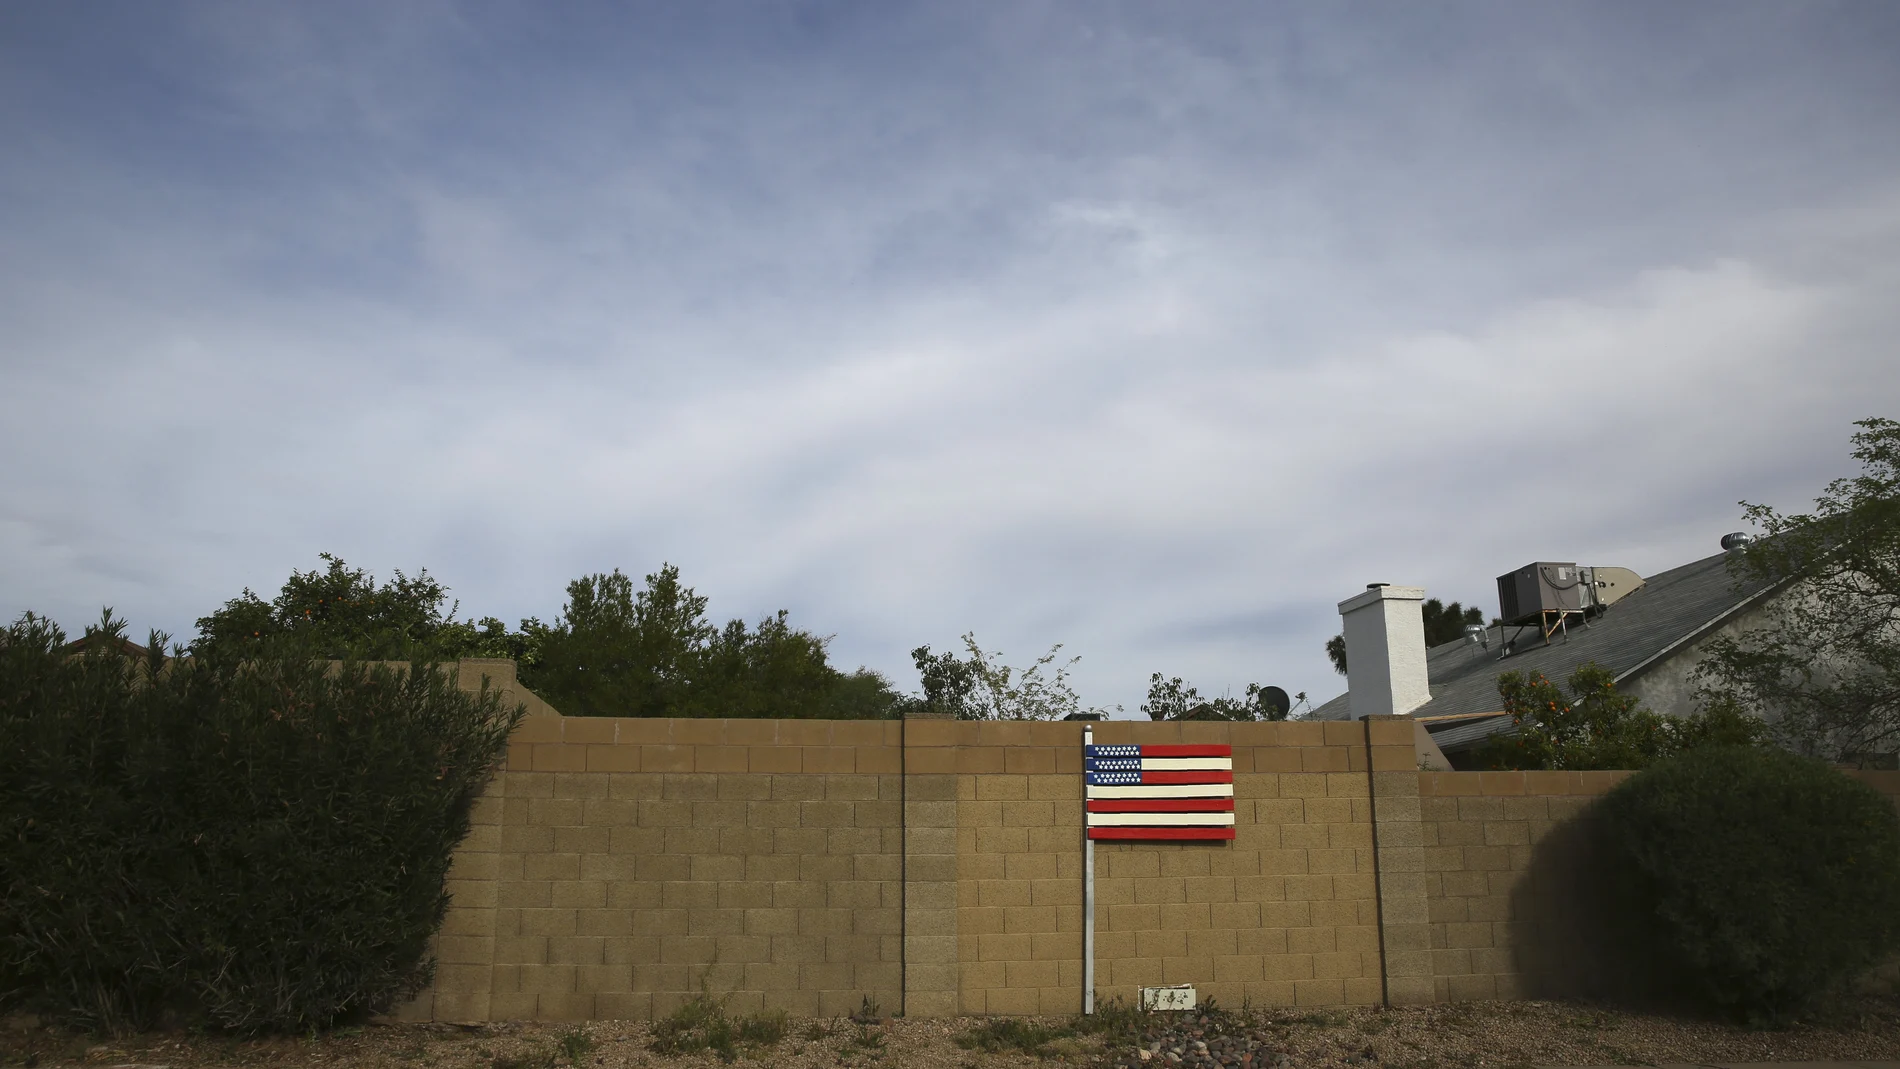 A makeshift U.S. flag stands behind a home located near the intersection between the Arizona State Route 101 and the Interstate 17 freeway in Phoenix, Ariz., on March 9, 2020. America's suburbs are poised to decide not just who wins the White House this year -- but the contours of the debate over guns, immigration, work, schools, housing and health care for years to come. What makes the suburbs matter is that they sit between the density of cities that favor Democrats and the open land of rural towns that back Republicans. (AP Photo/Dario Lopez-MIlls)